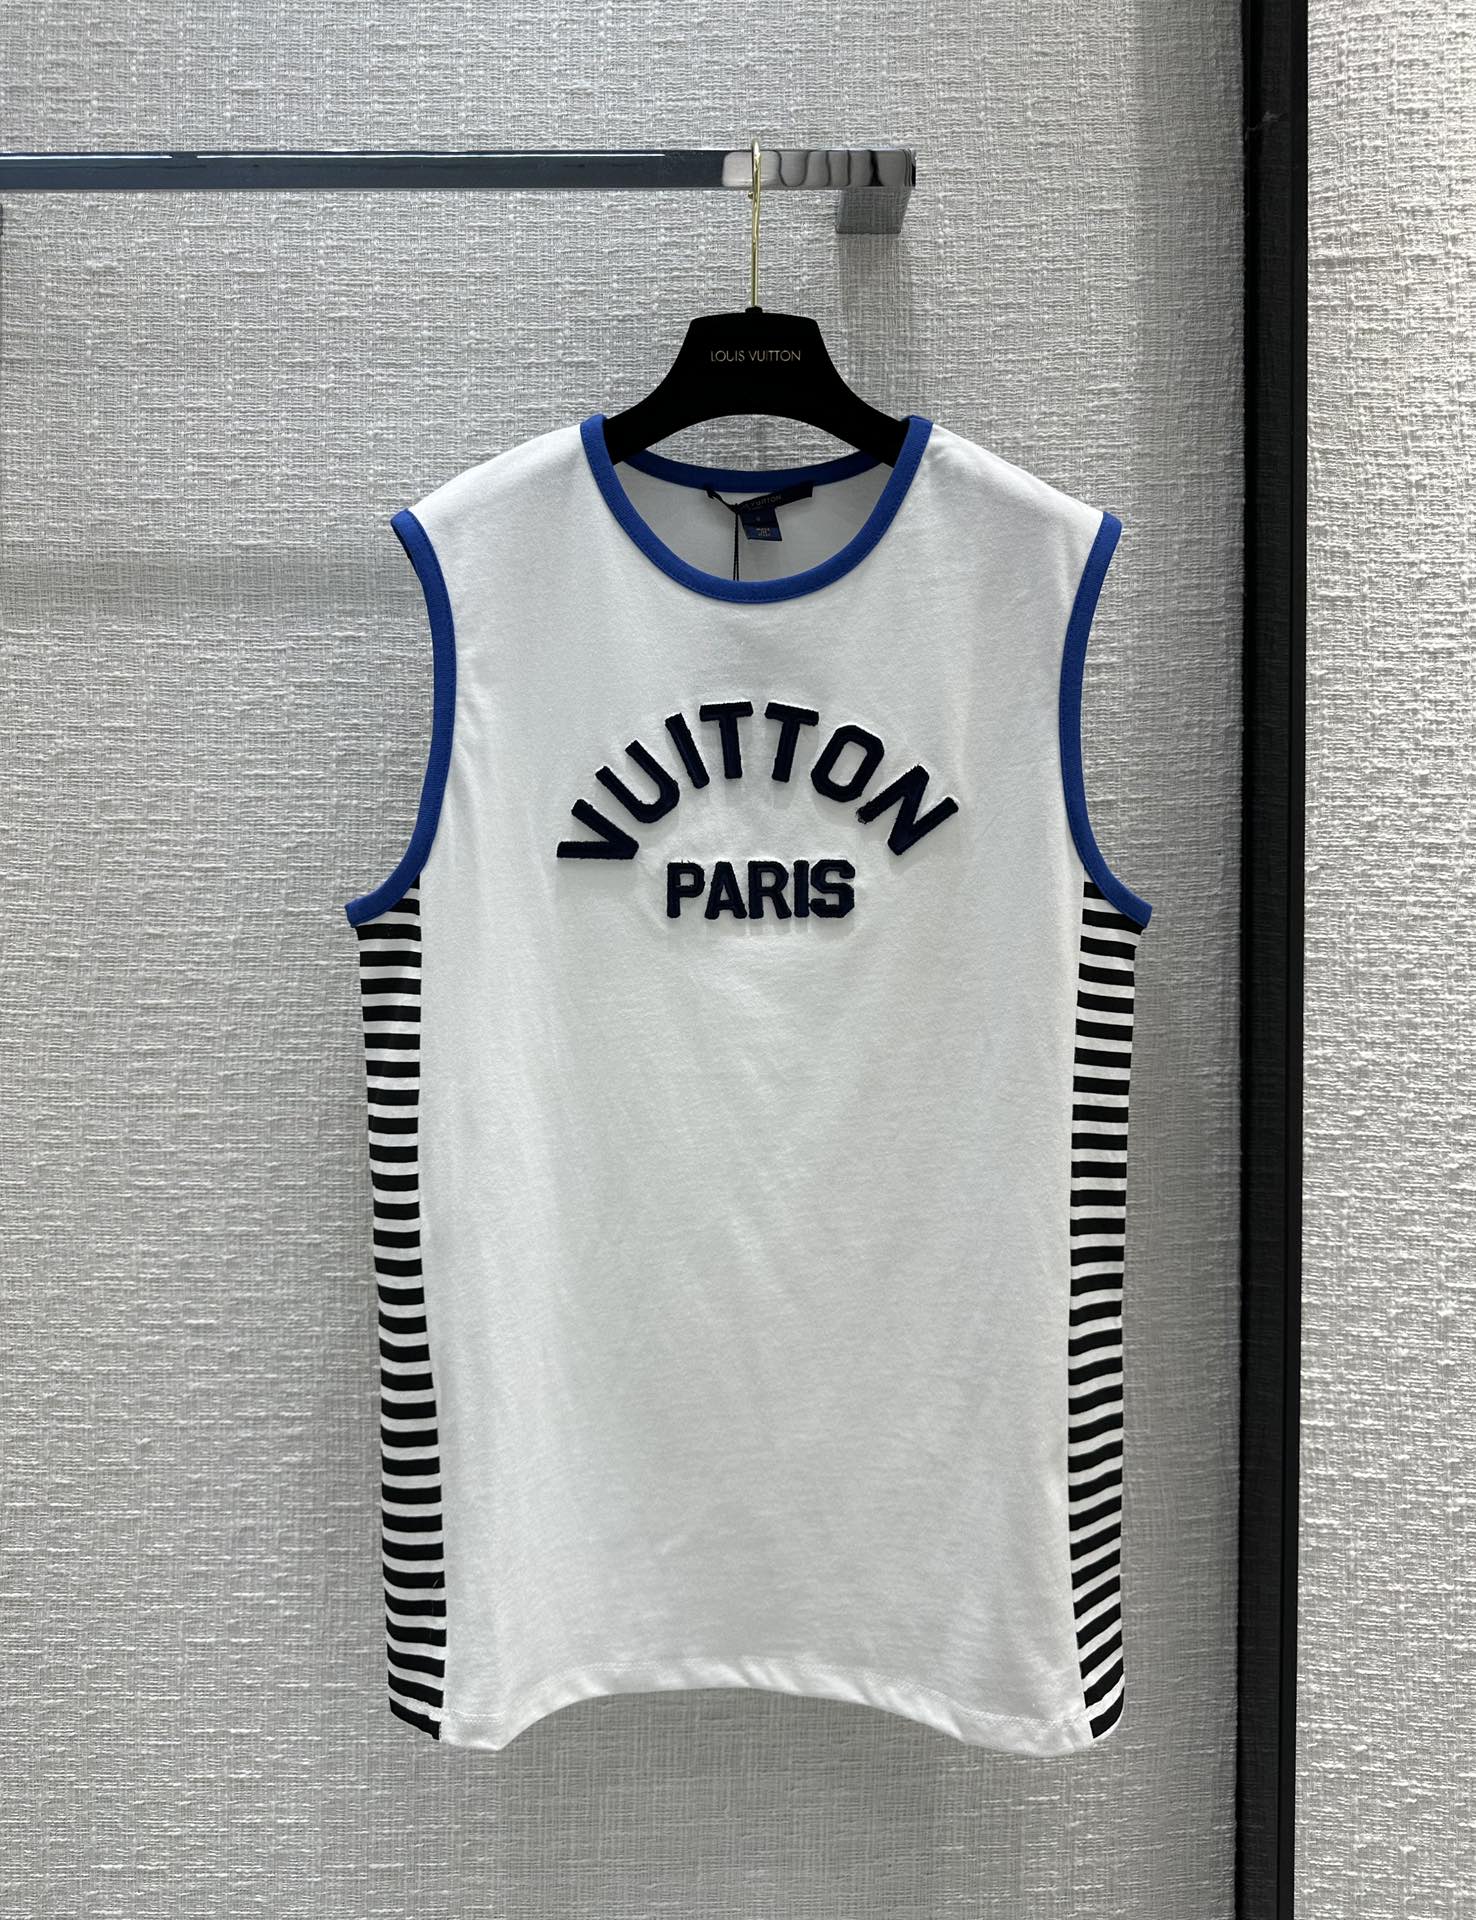 Louis Vuitton Clothing T-Shirt Tank Top Embroidery Cotton Spring/Summer Collection